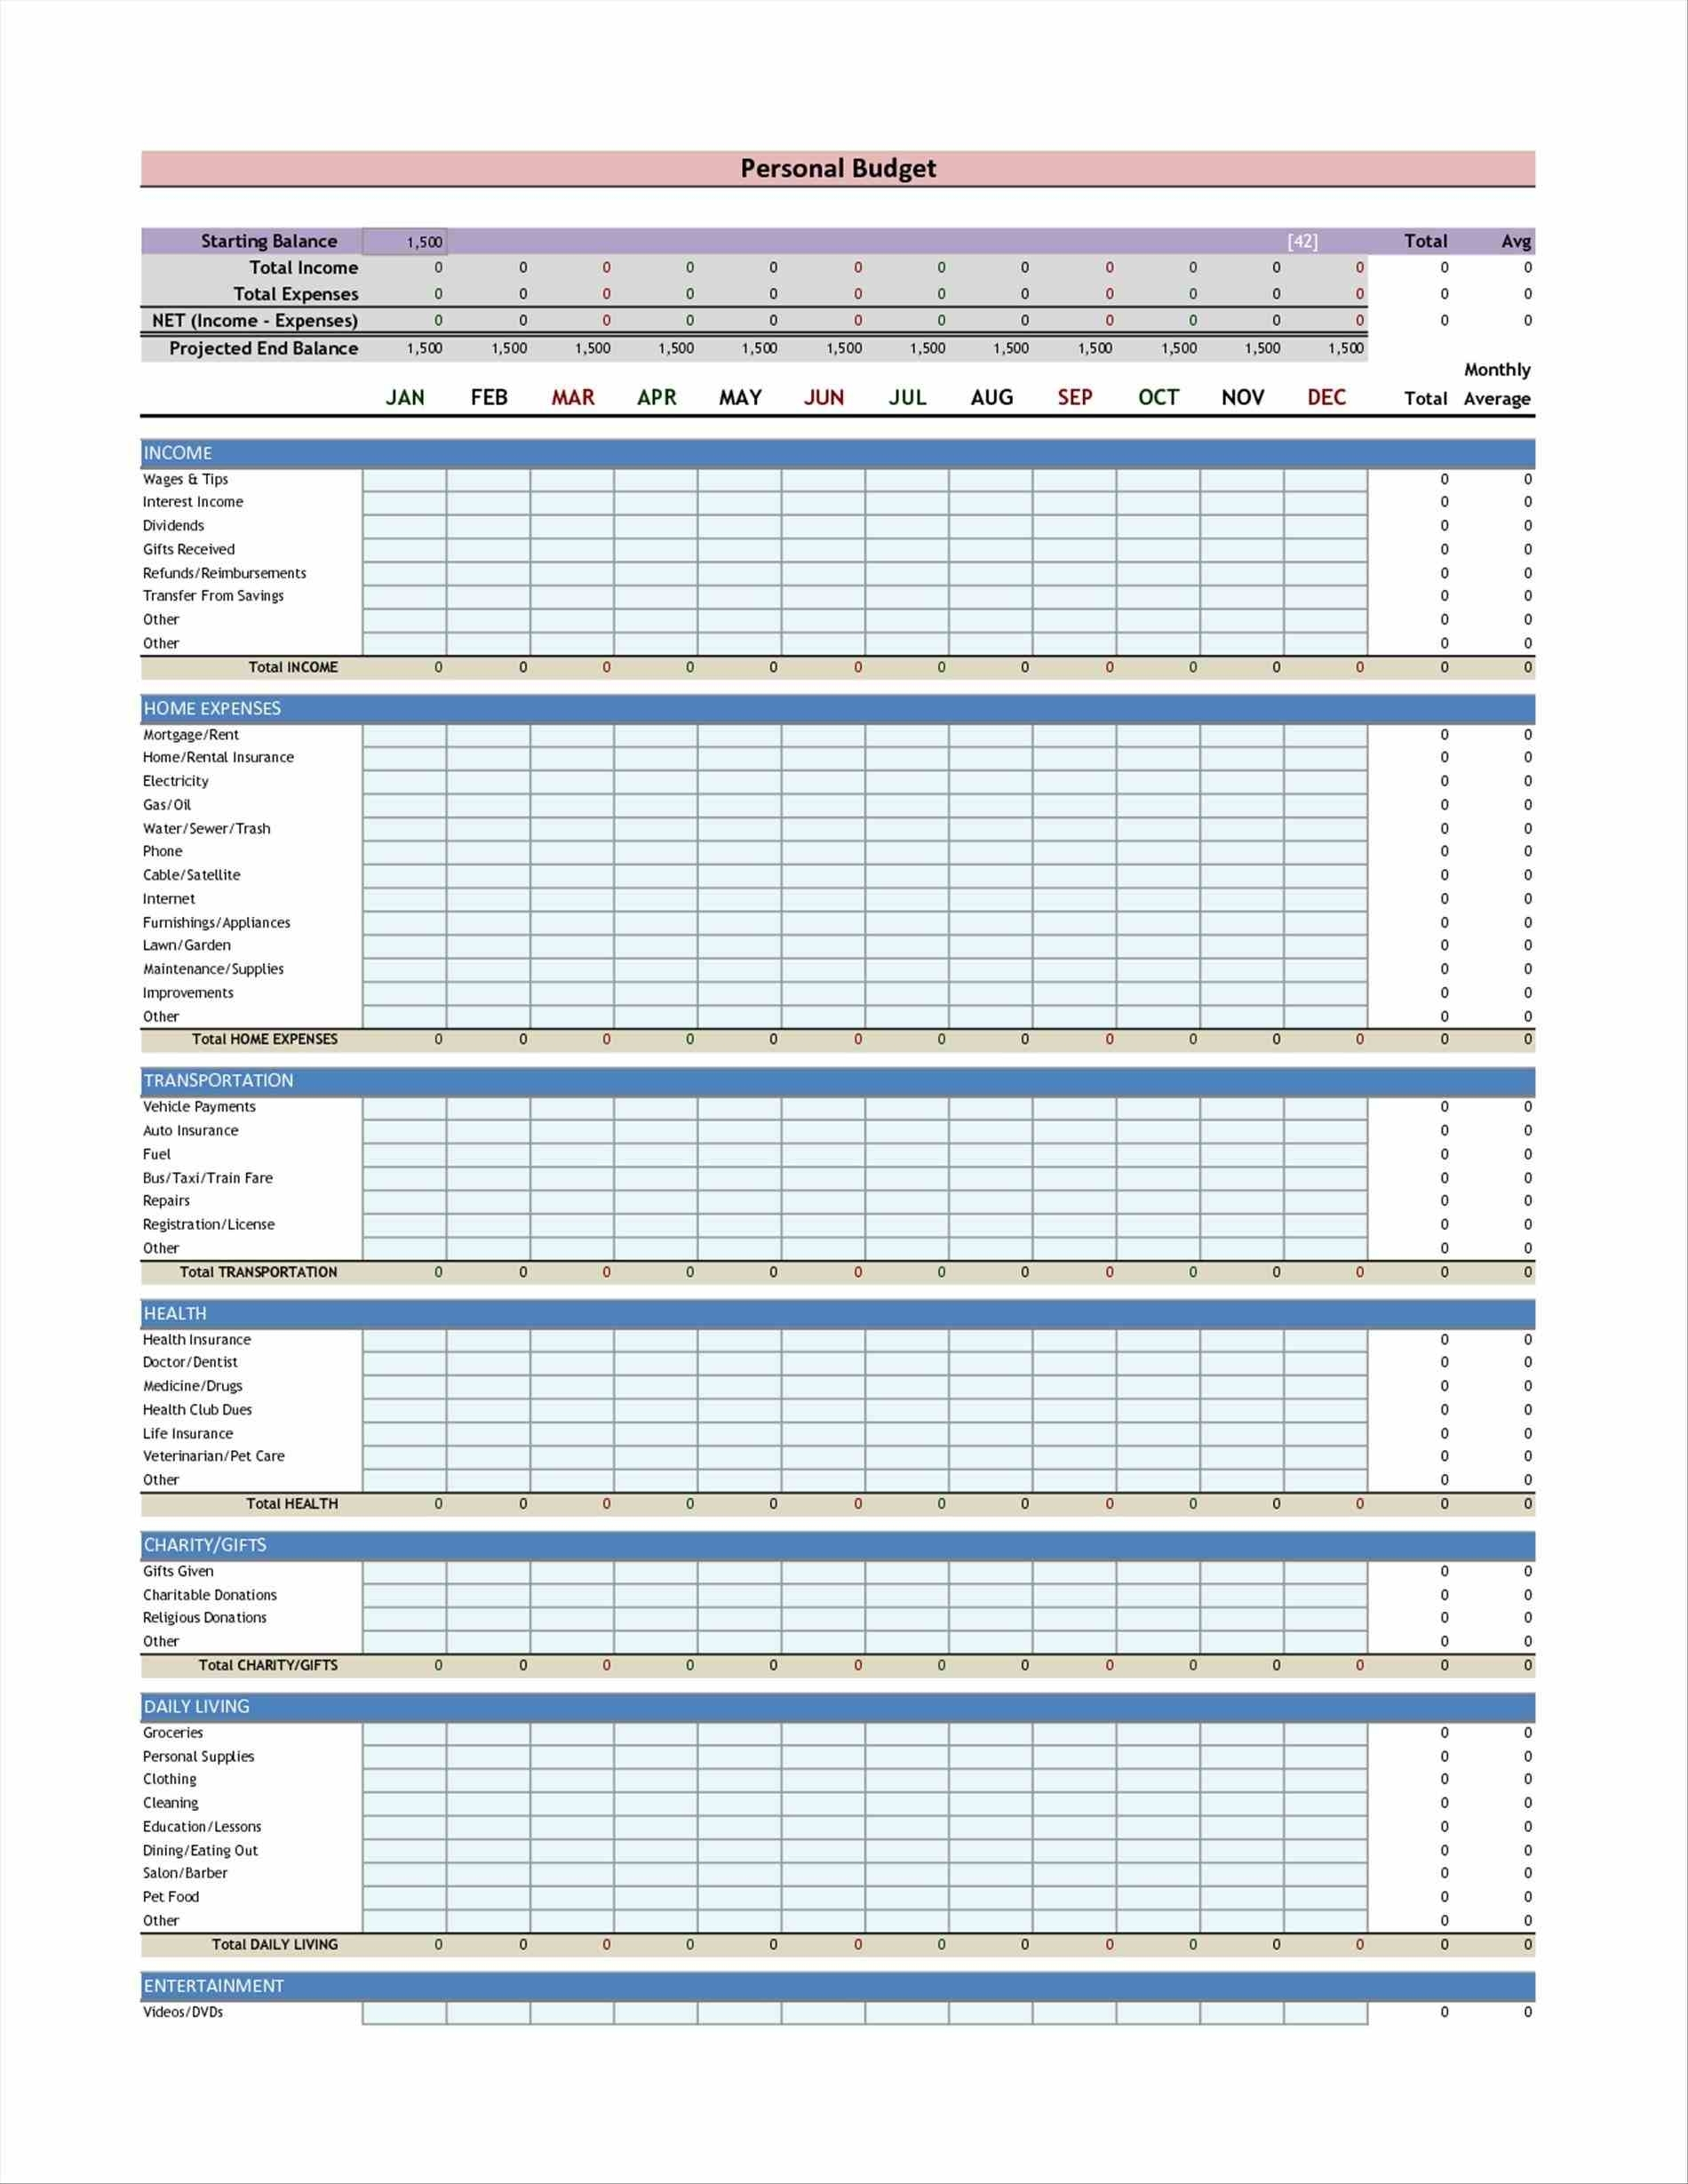 Budgeting Software Spreadsheet Personal Microsoft Excel Personal with Personal Monthly Budget Planner Excel